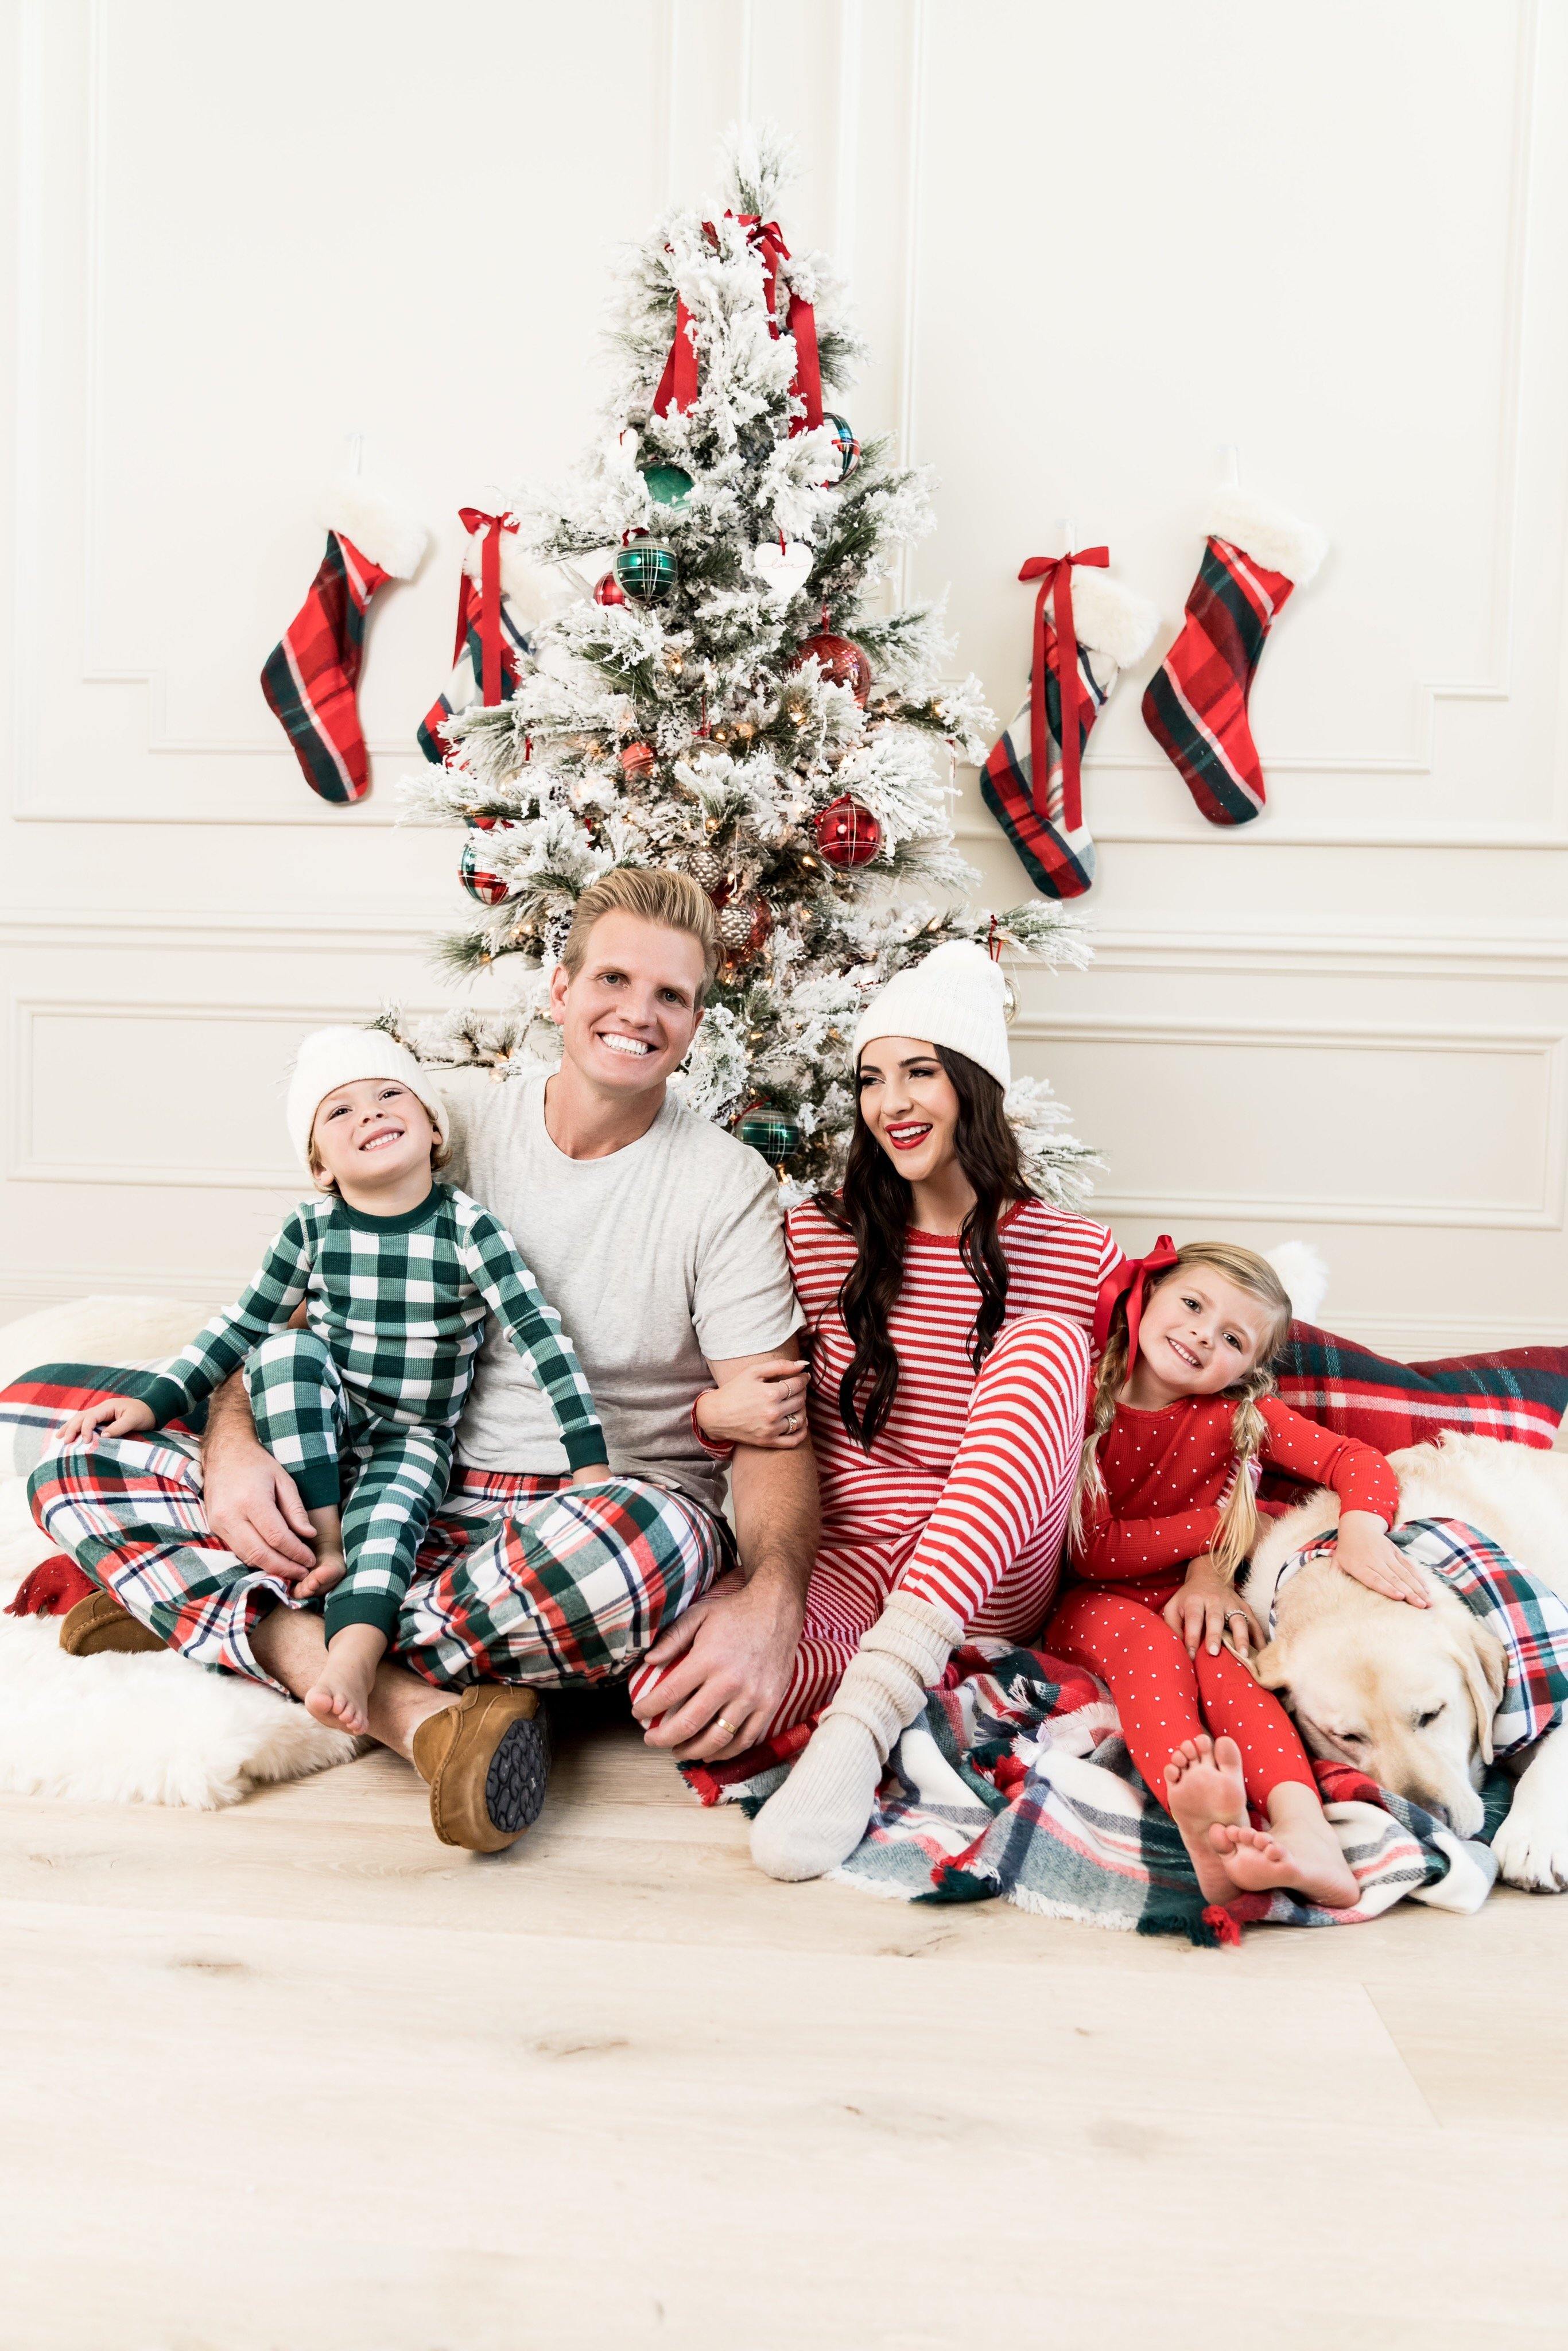 The Cutest Matching Family Pajamas for the Holidays – Rachel Parcell, Inc.